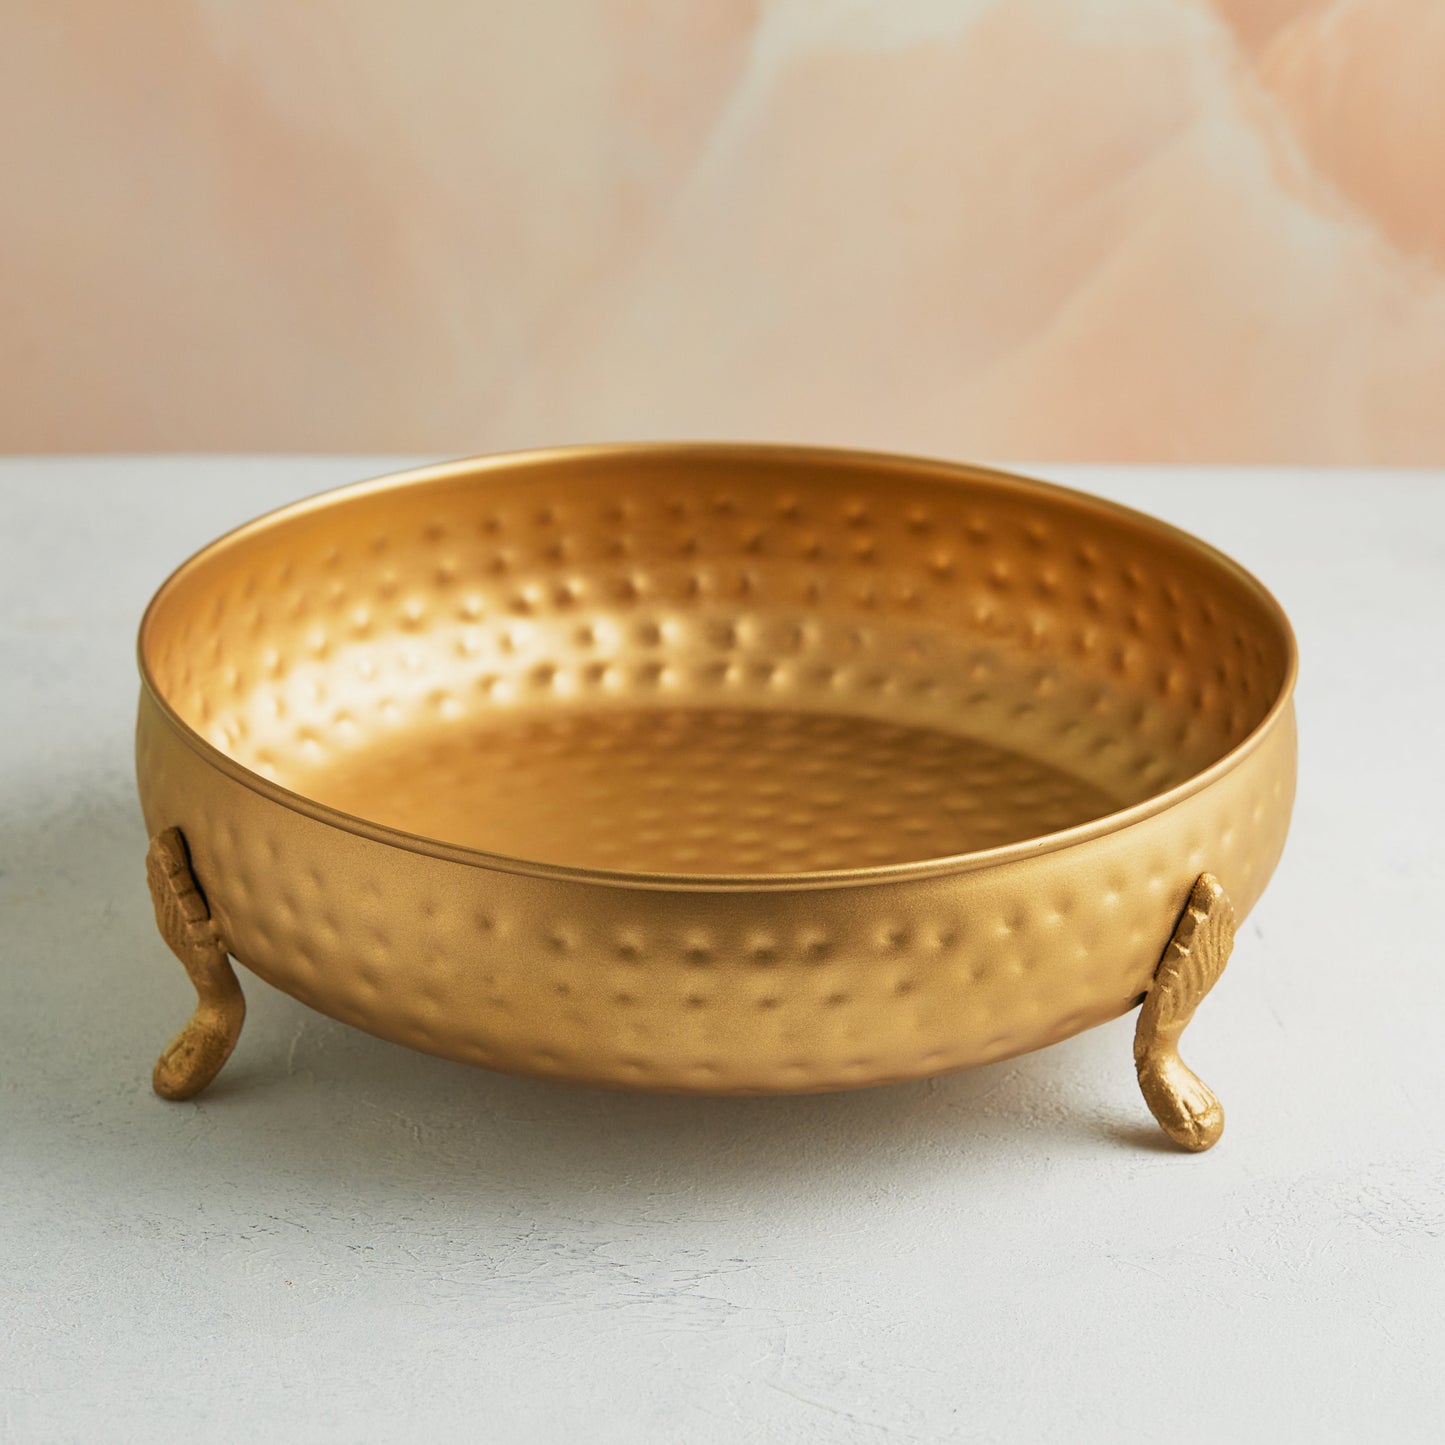 Metal Handcrafted Decorative Urali Bowl with Stand